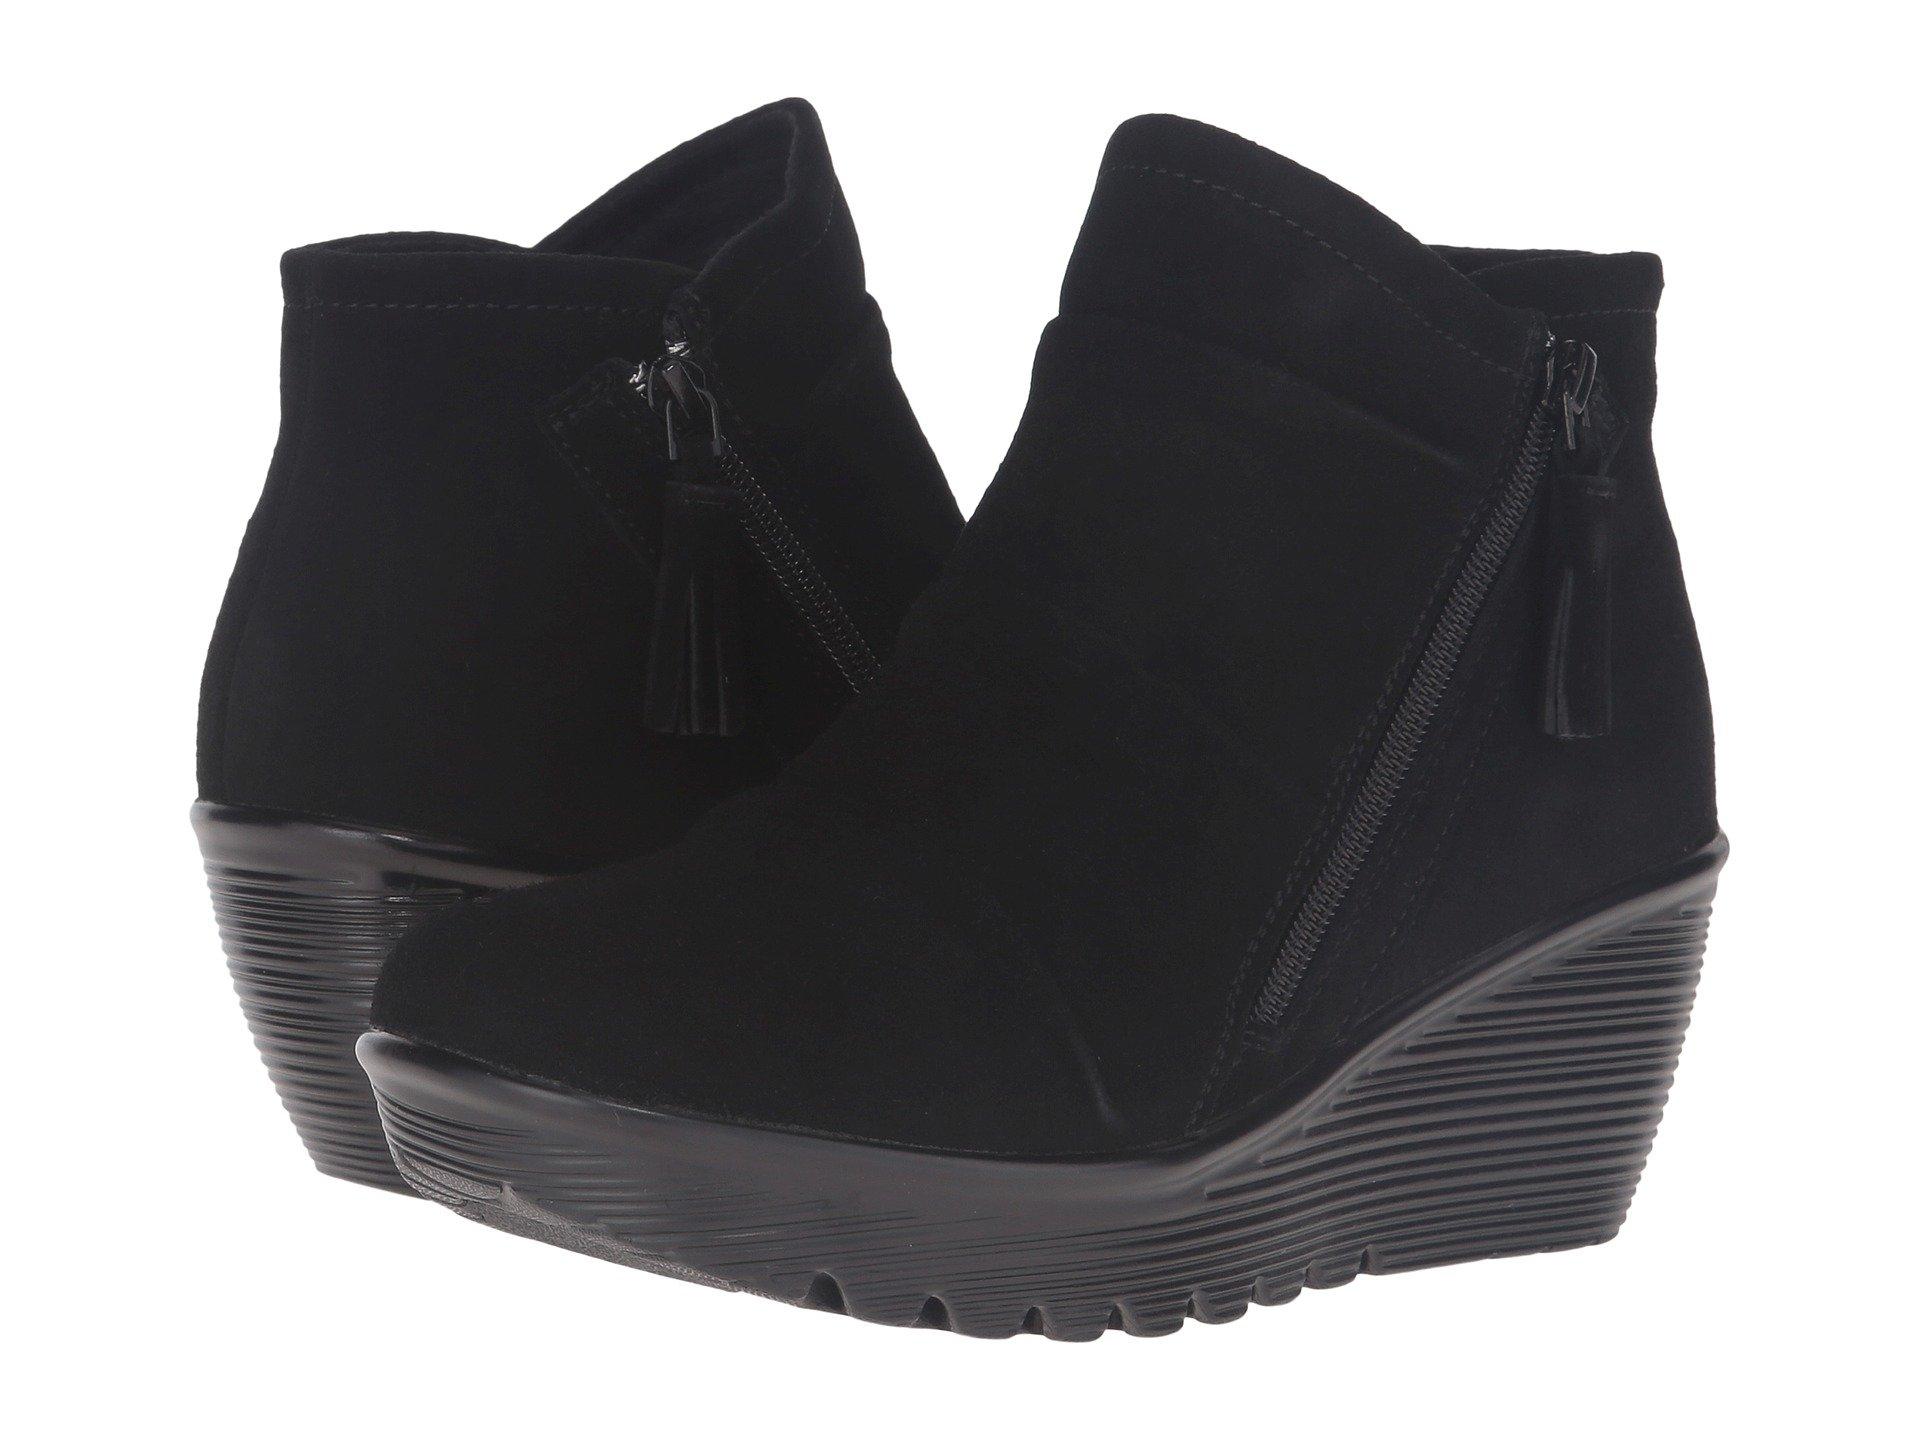 Skechers Suede Parallel-double Trouble Ankle Bootie in Black Suede (Black)  | Lyst